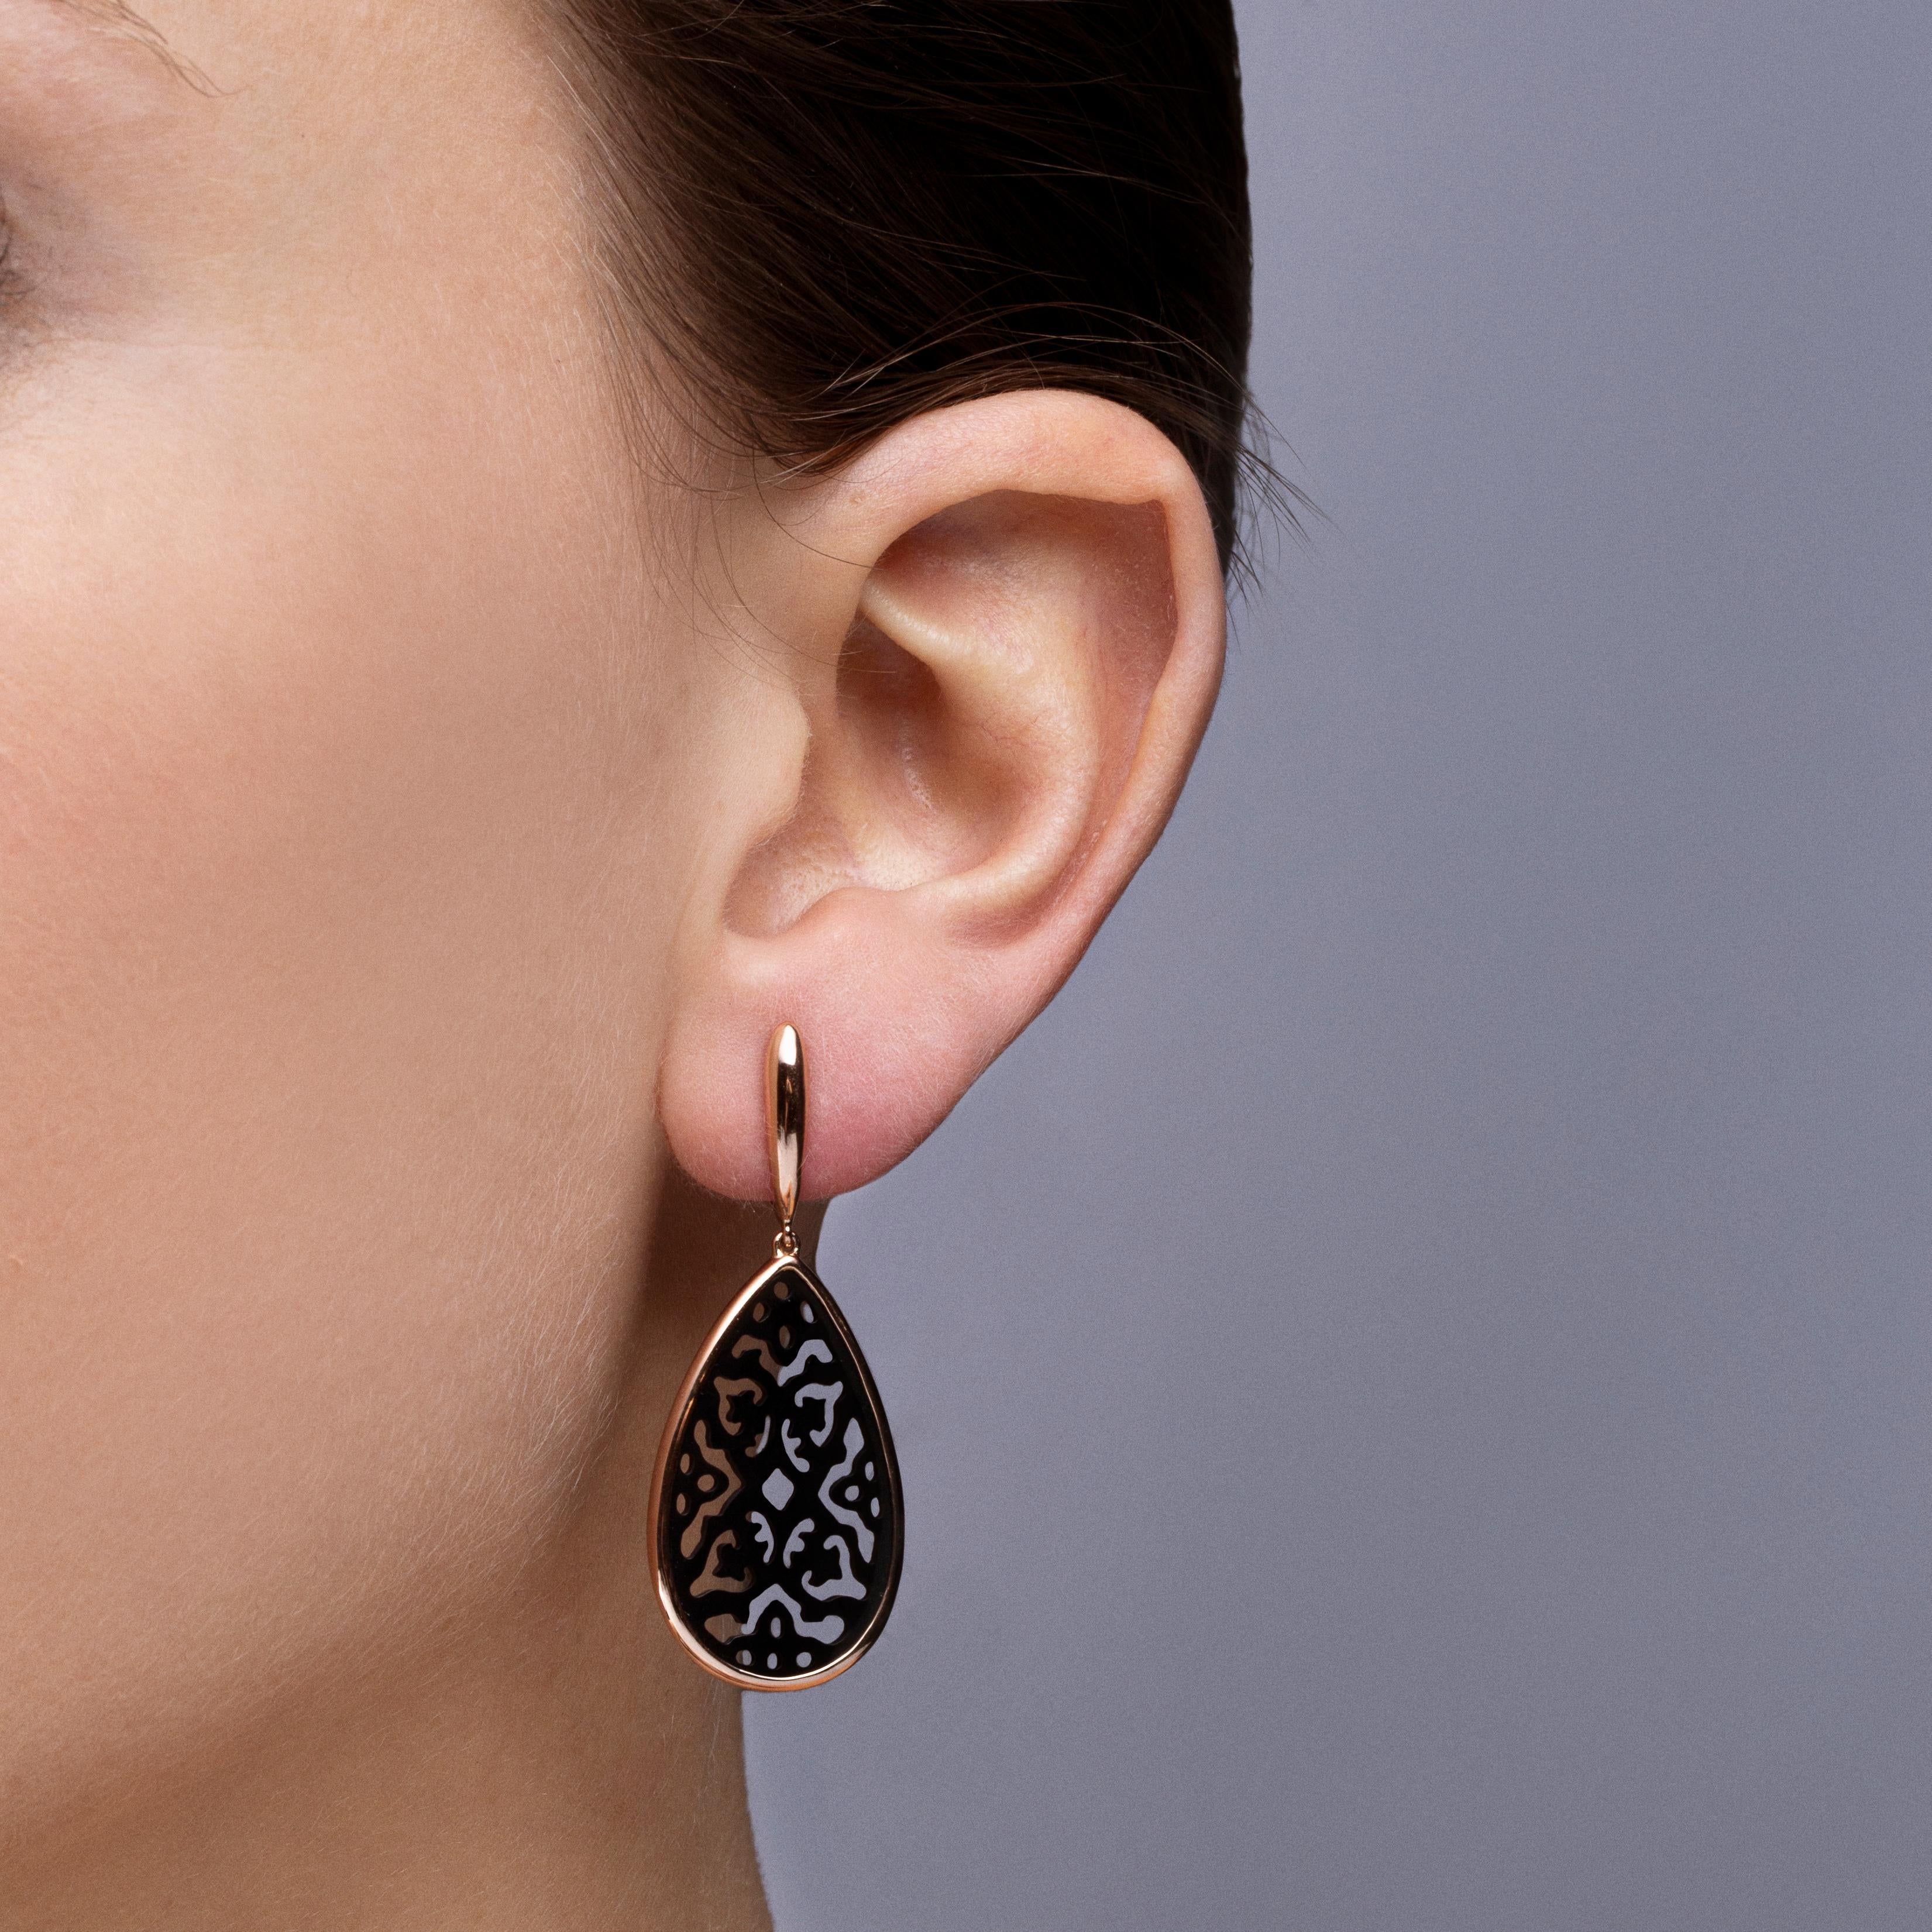 Alex Jona design collection, hand crafted in Italy, 18 karat rose gold carved openwork onyx pendant earrings.
Dimensions : H x1.17 in, W 0.46 in. -H x 29.72 mm, W x 11.69 mm. 

Alex Jona jewels stand out, not only for their special design and for